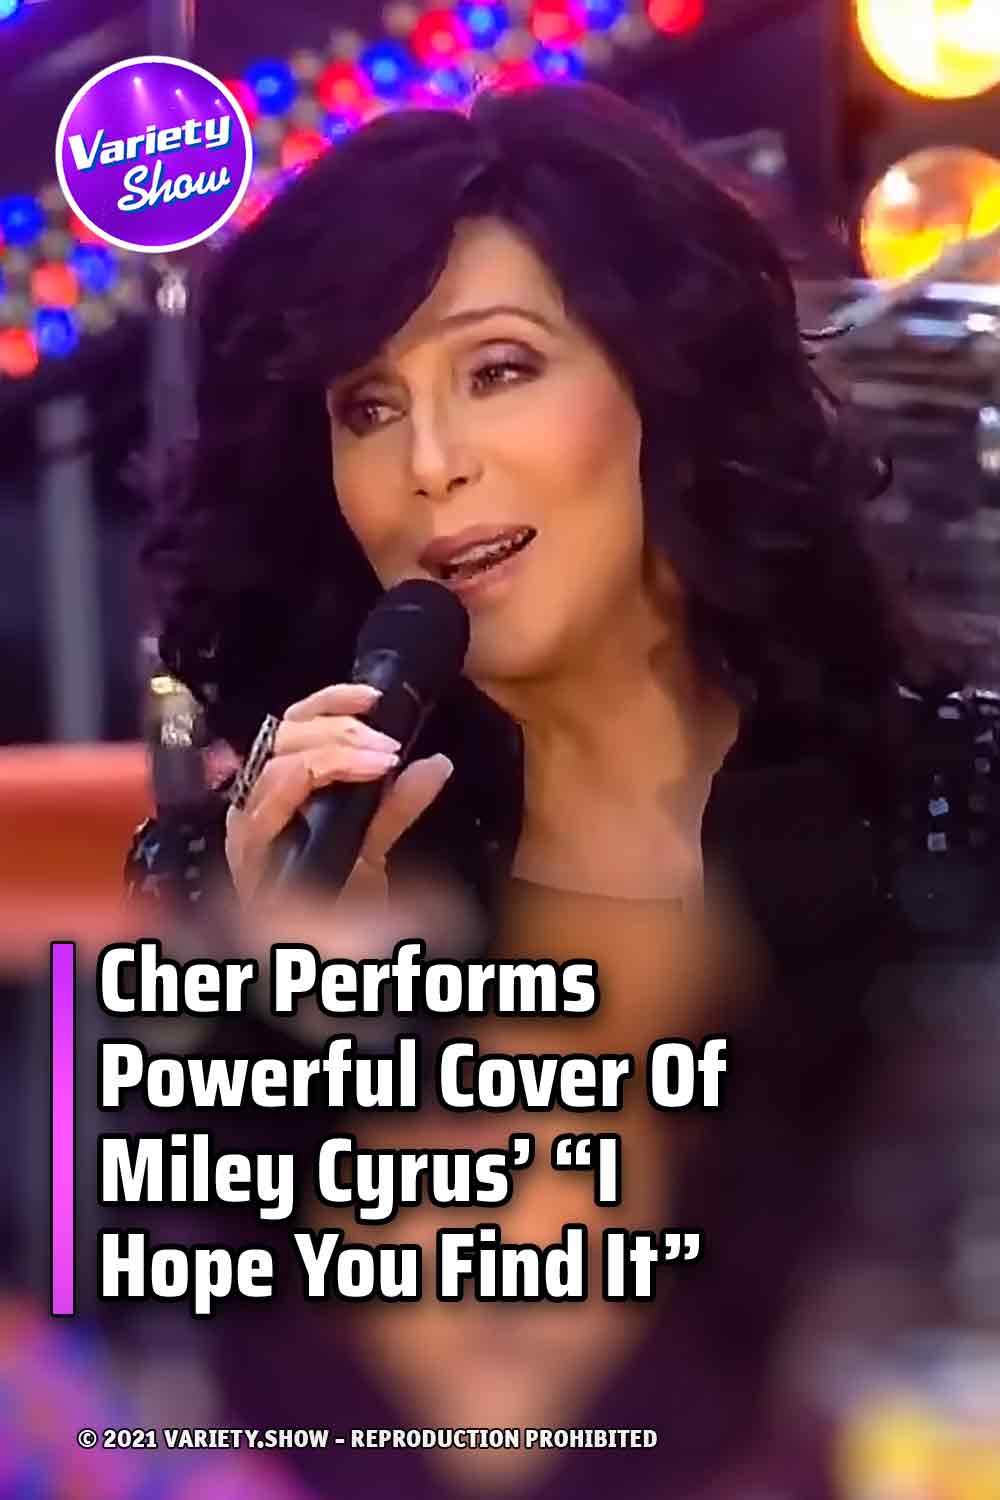 Cher Performs Powerful Cover Of Miley Cyrus’ “I Hope You Find It”